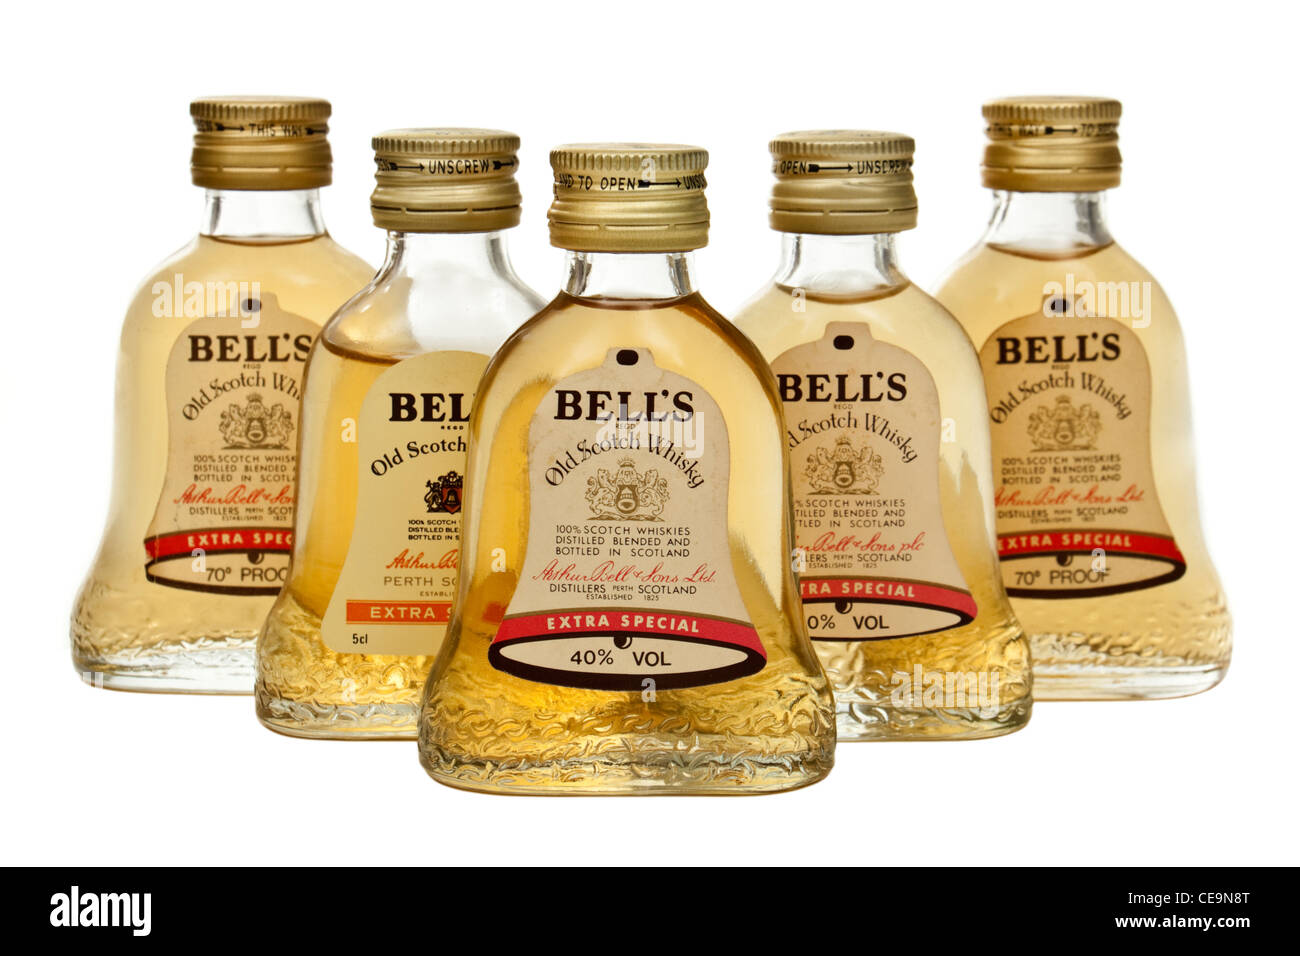 Group of Bell's Extra Special 'Old Scotch Whisky' miniatures Stock Photo